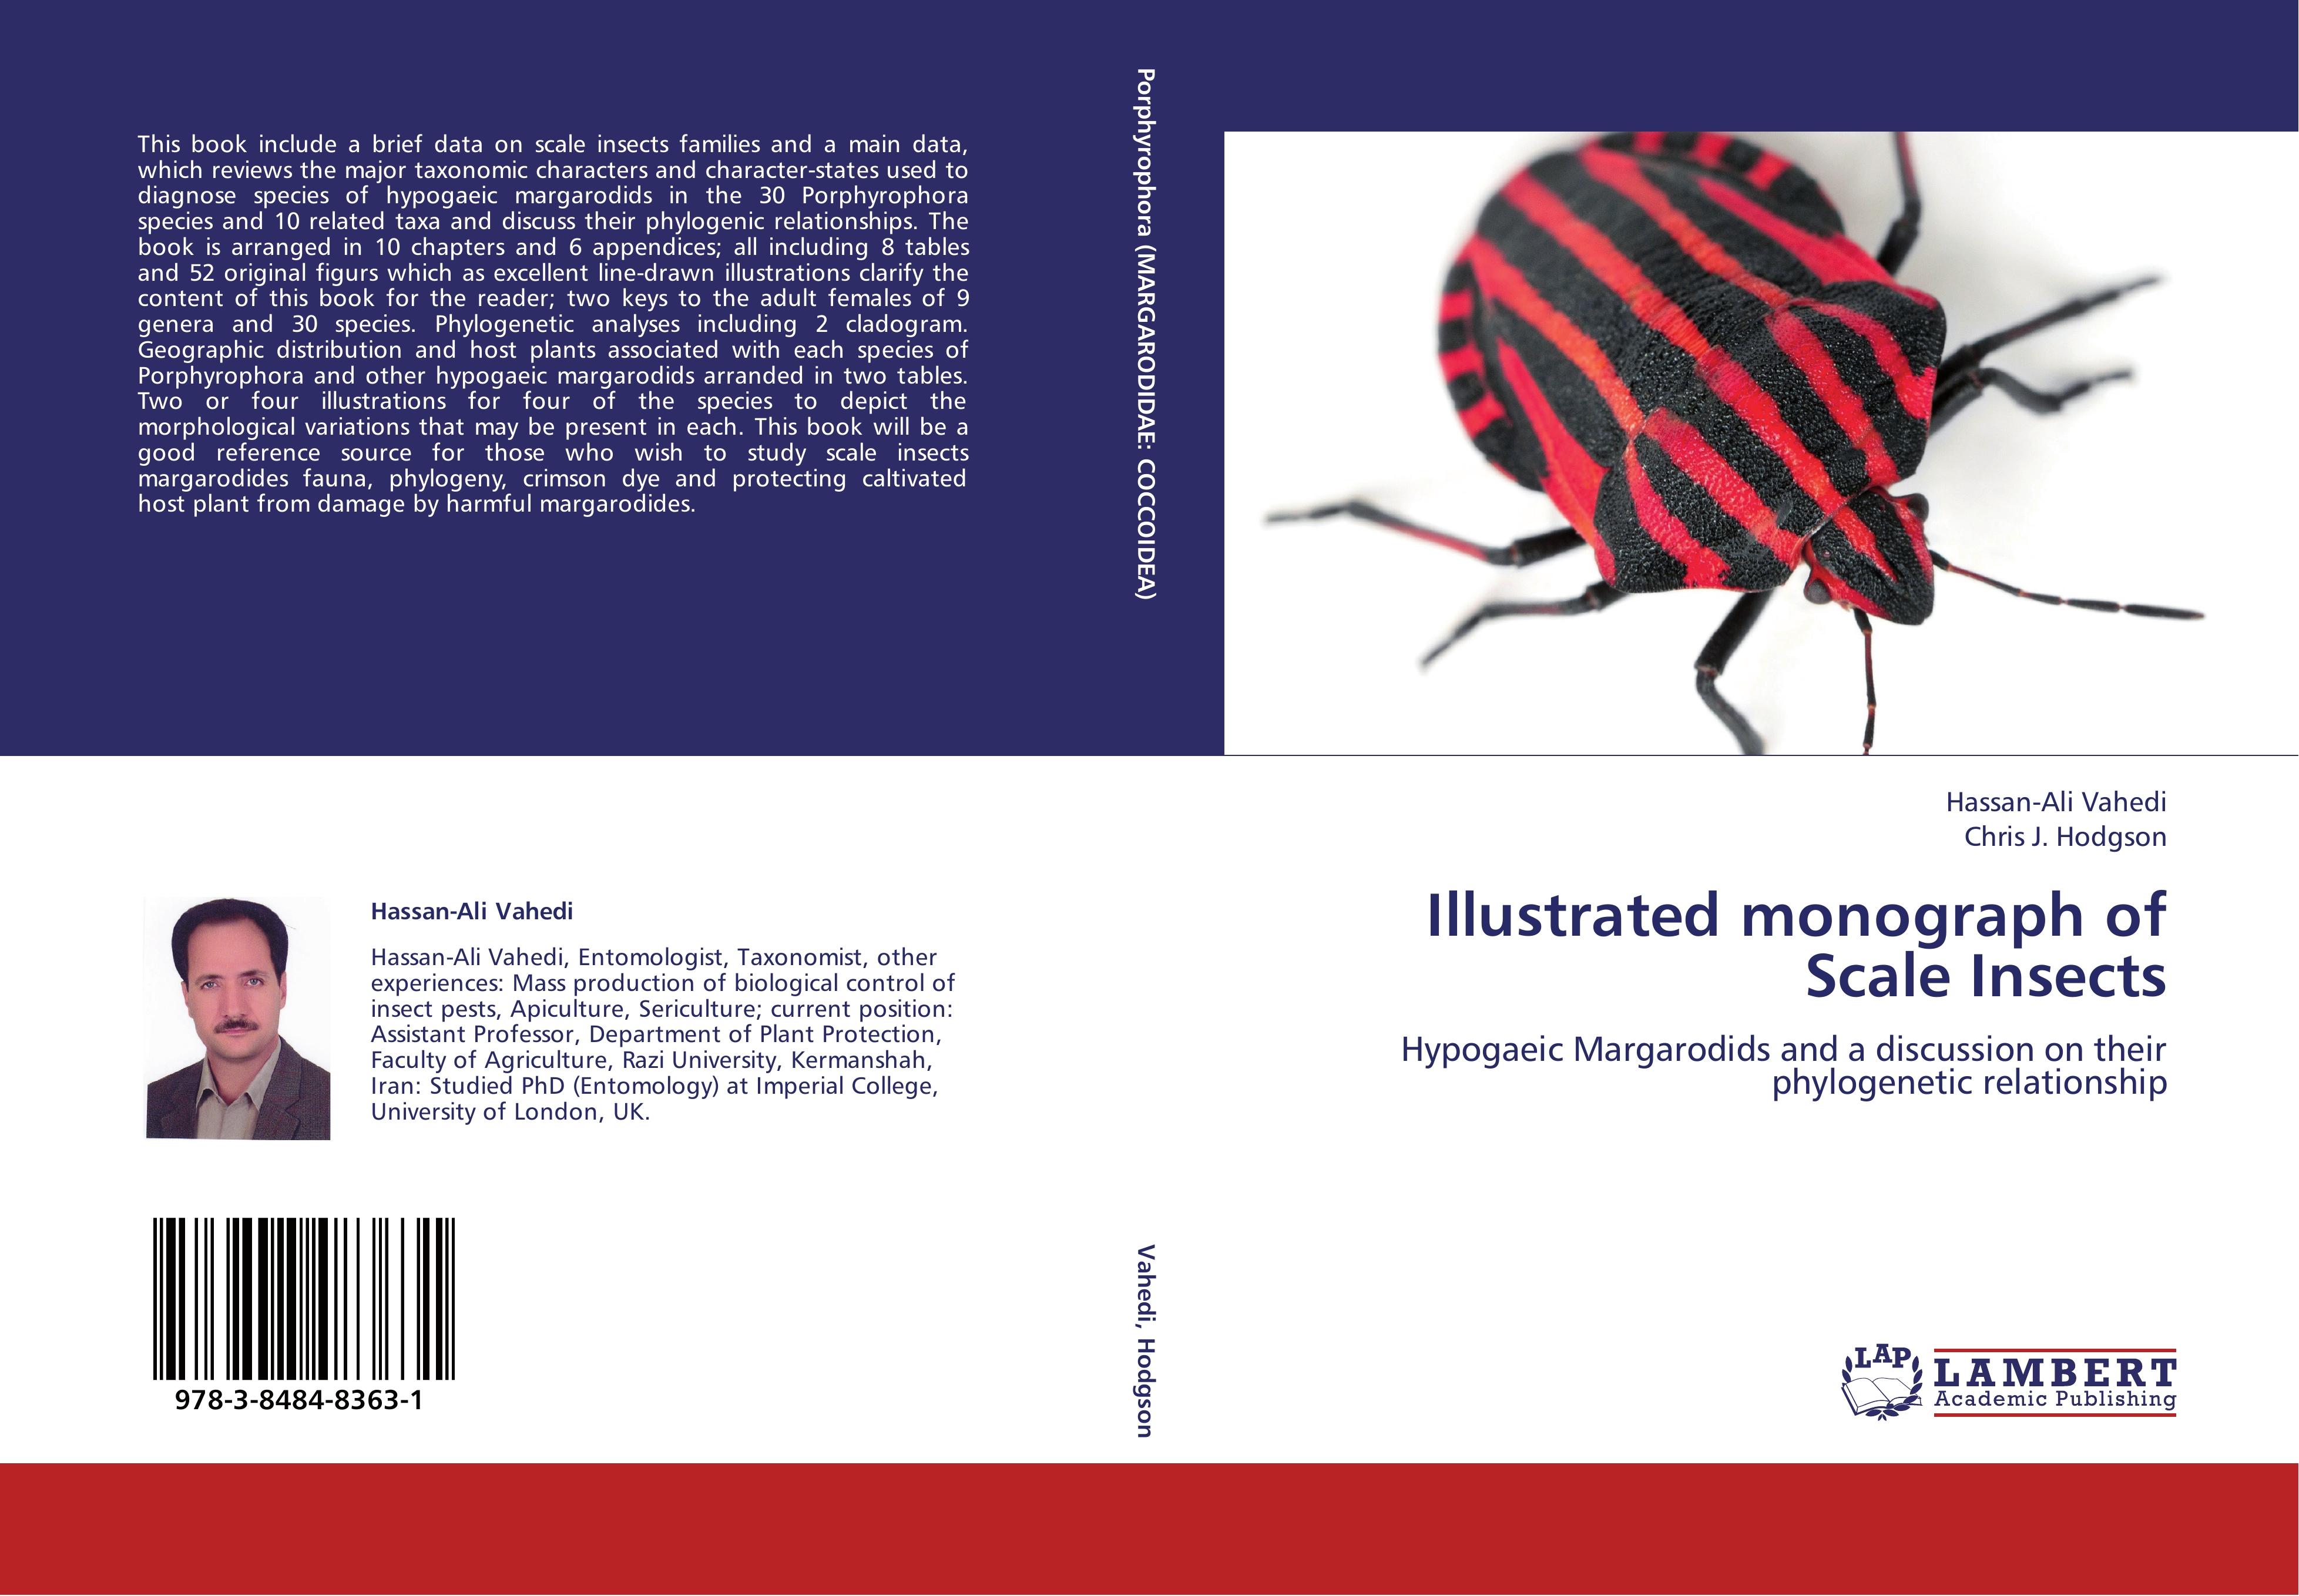 ILLUSTRATED MONOGRAPH OF SCALE INSECTS | HYPOGAEIC MARGARODIDS AND A DISCUSSION ON THEIR PHYLOGENETIC RELATIONSHIPS | Hassan-Ali Vahedi (u. a.) | Taschenbuch | Paperback | 356 S. | Englisch | 2012 - Vahedi, Hassan-Ali